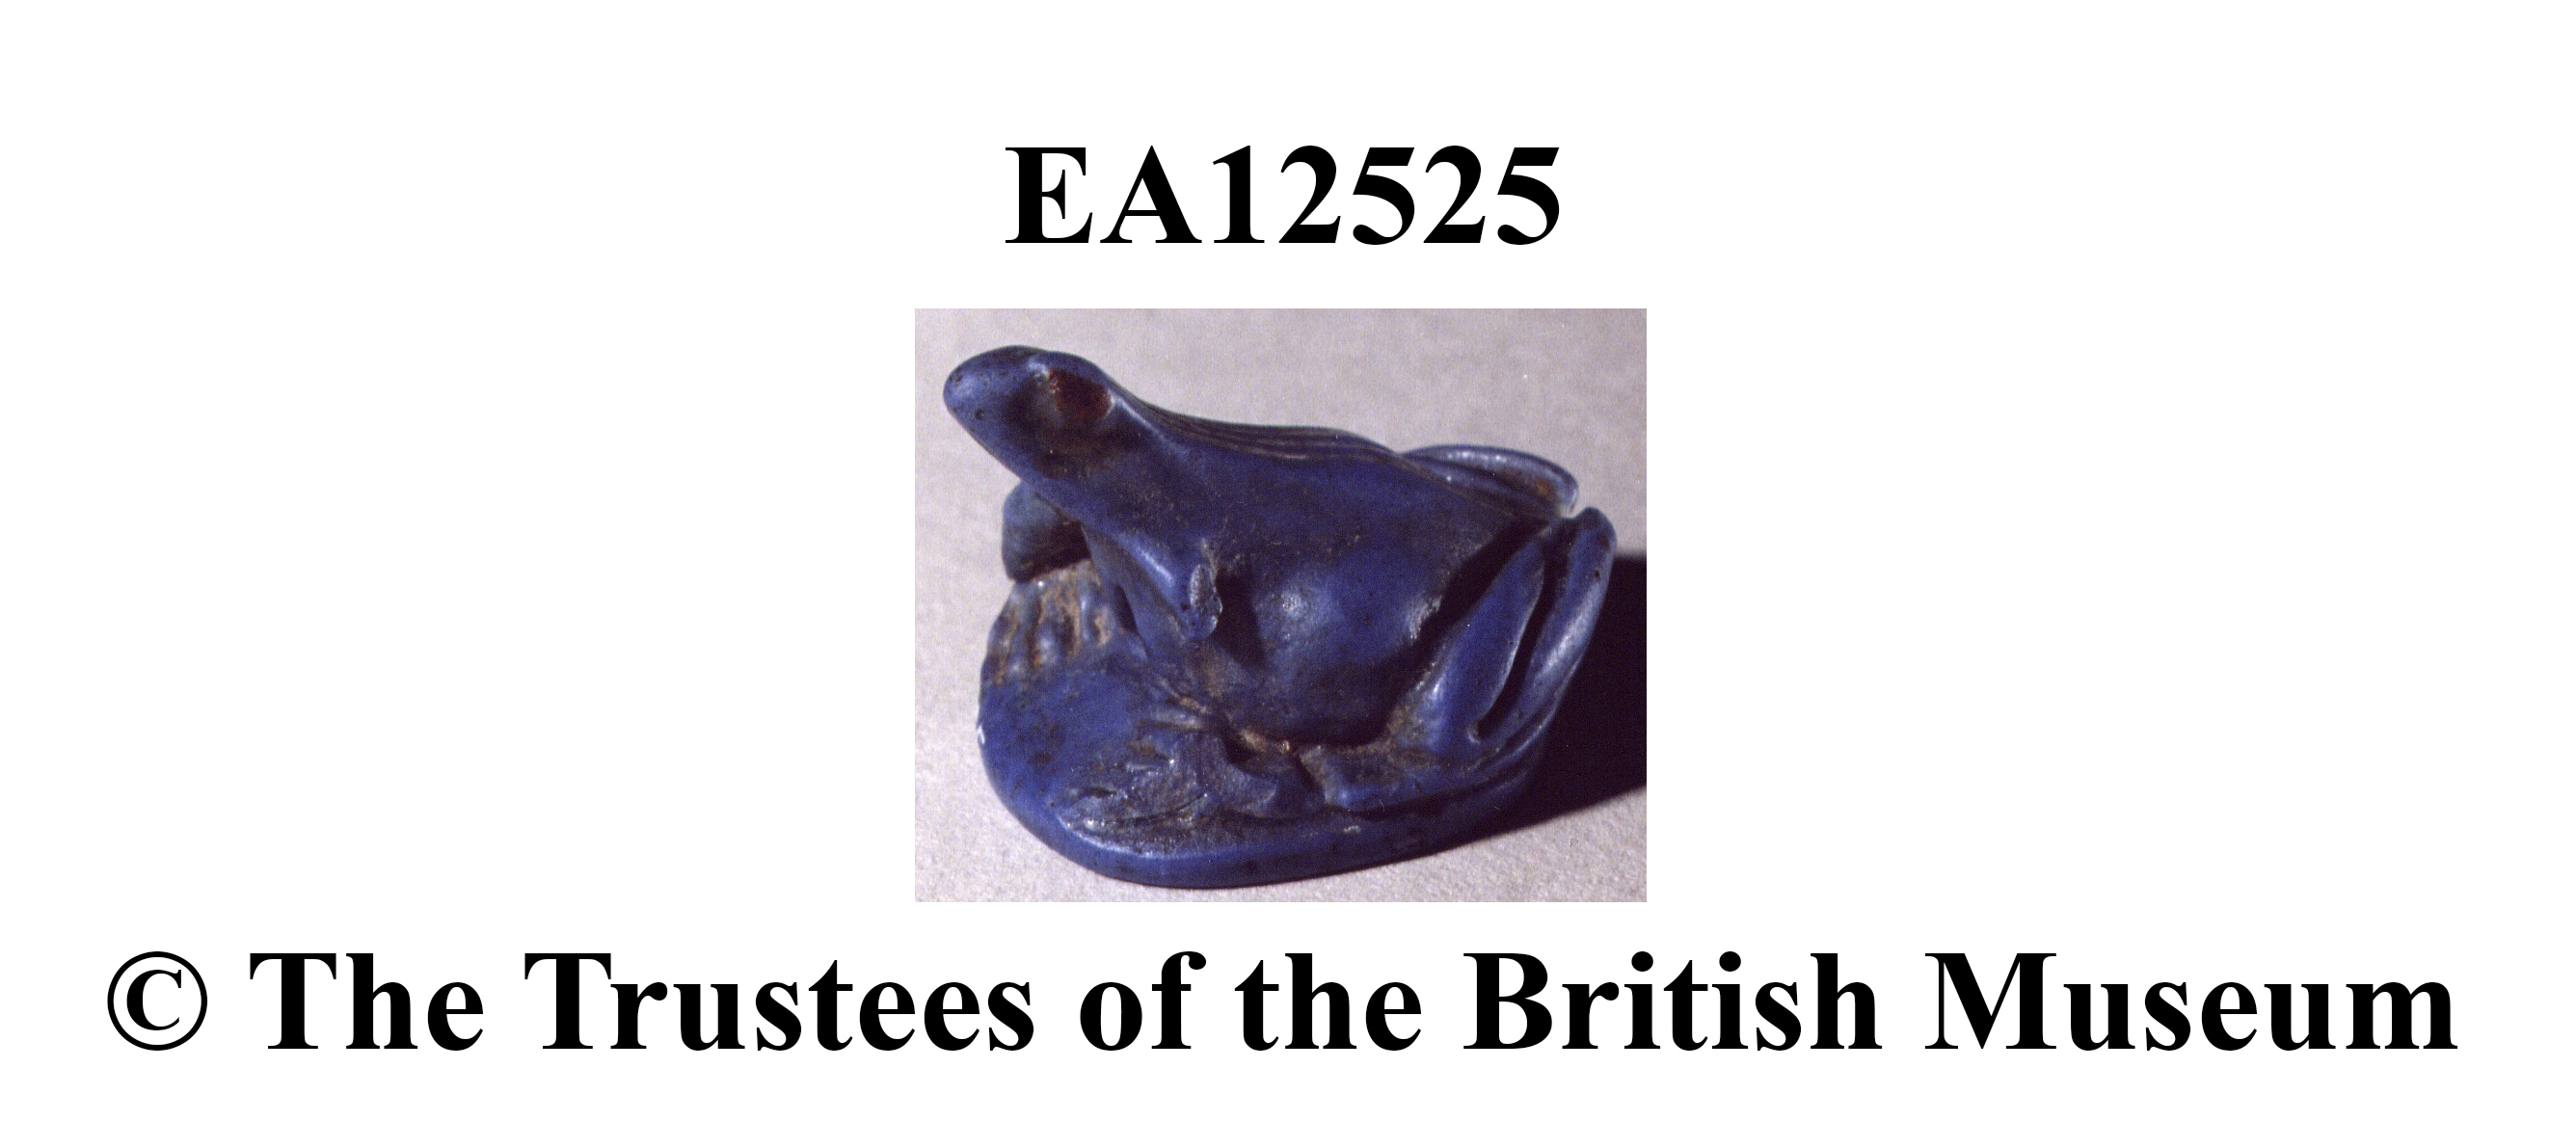 Image for: Stamp amulet of a frog